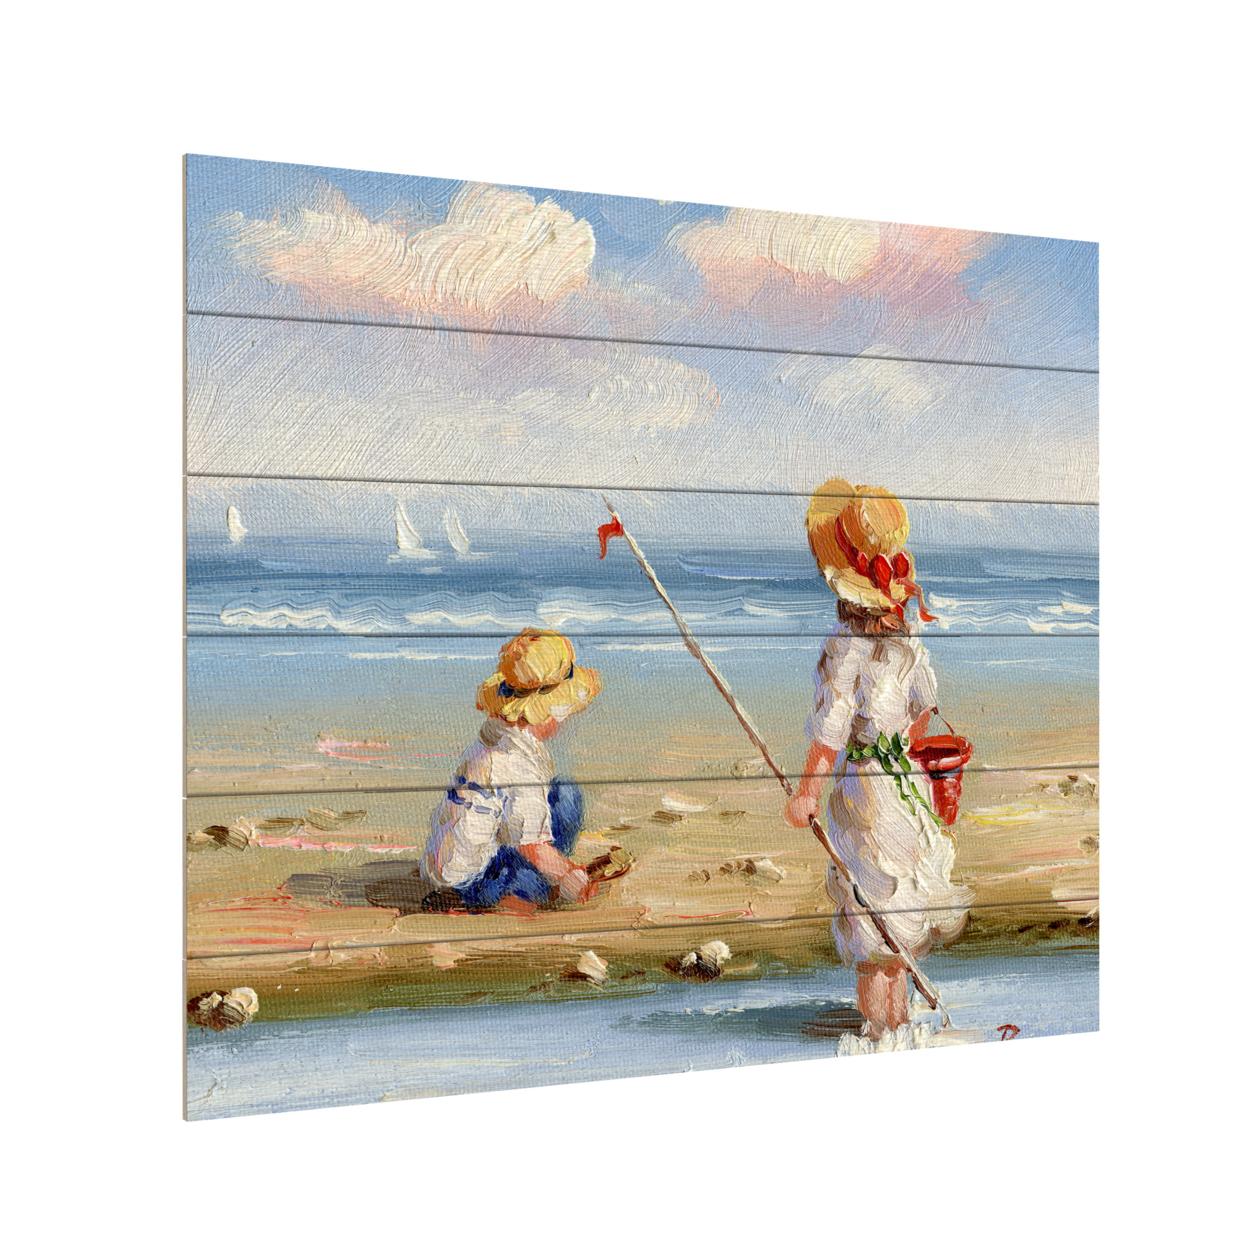 Wooden Slat Art 18 X 22 Inches Titled At The Beach III Ready To Hang Home Decor Picture